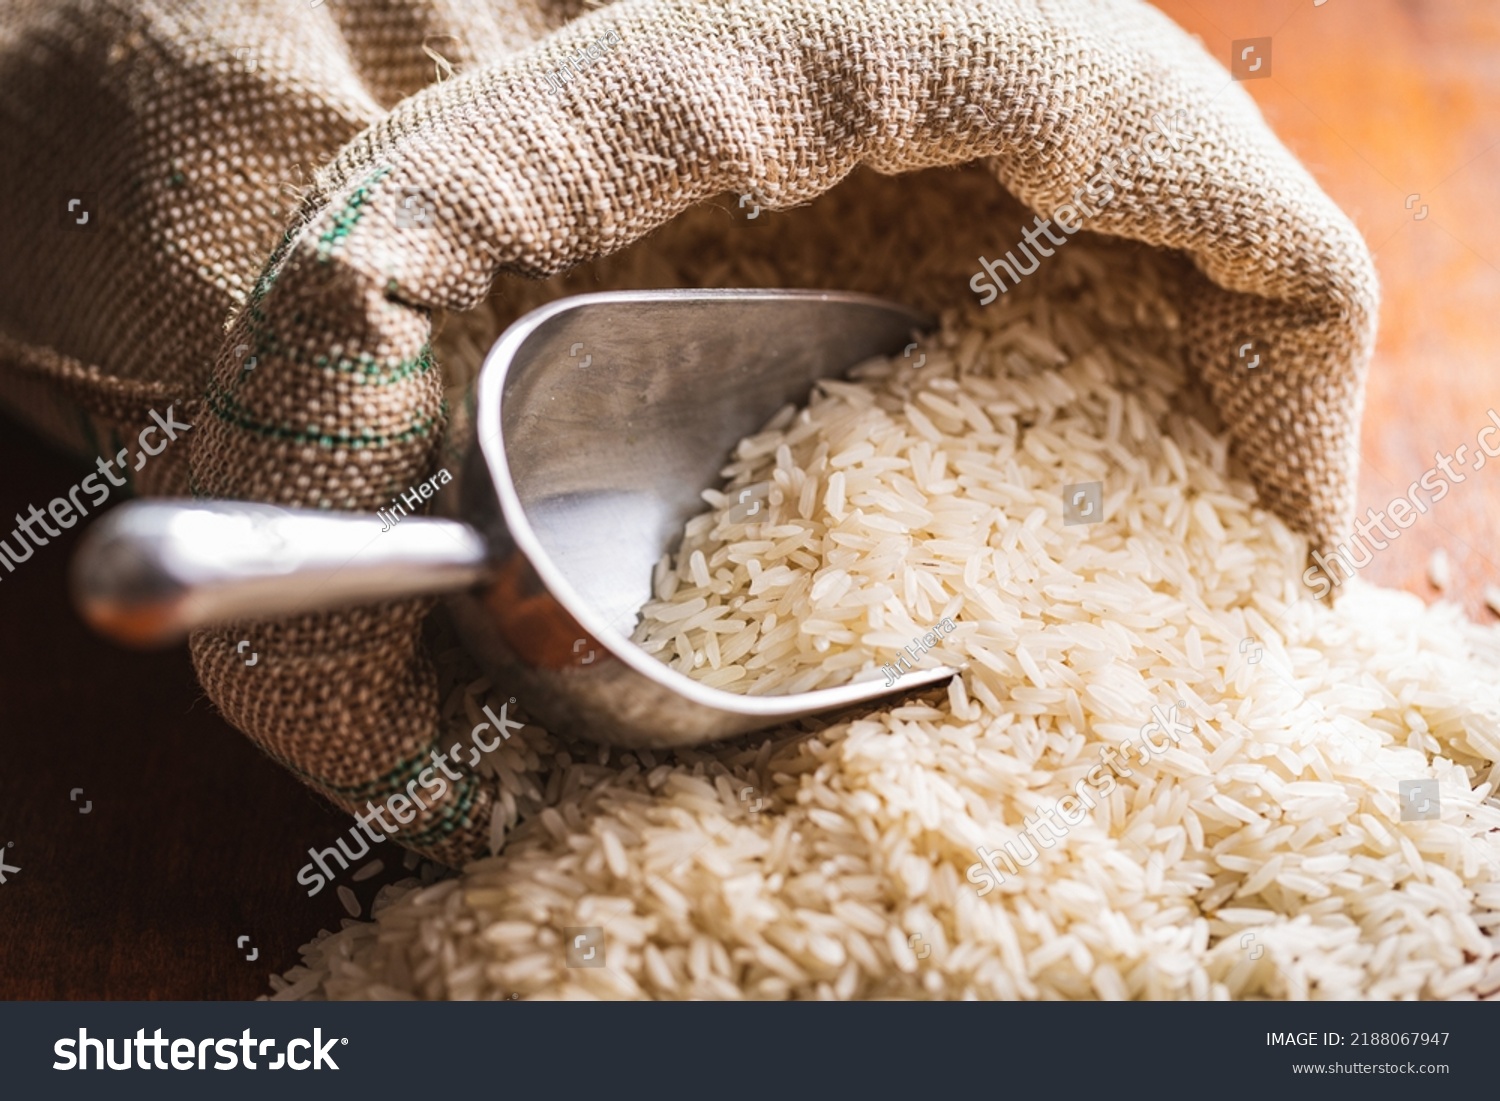 Uncooked white rice in a burlap sack on wooden table. #2188067947